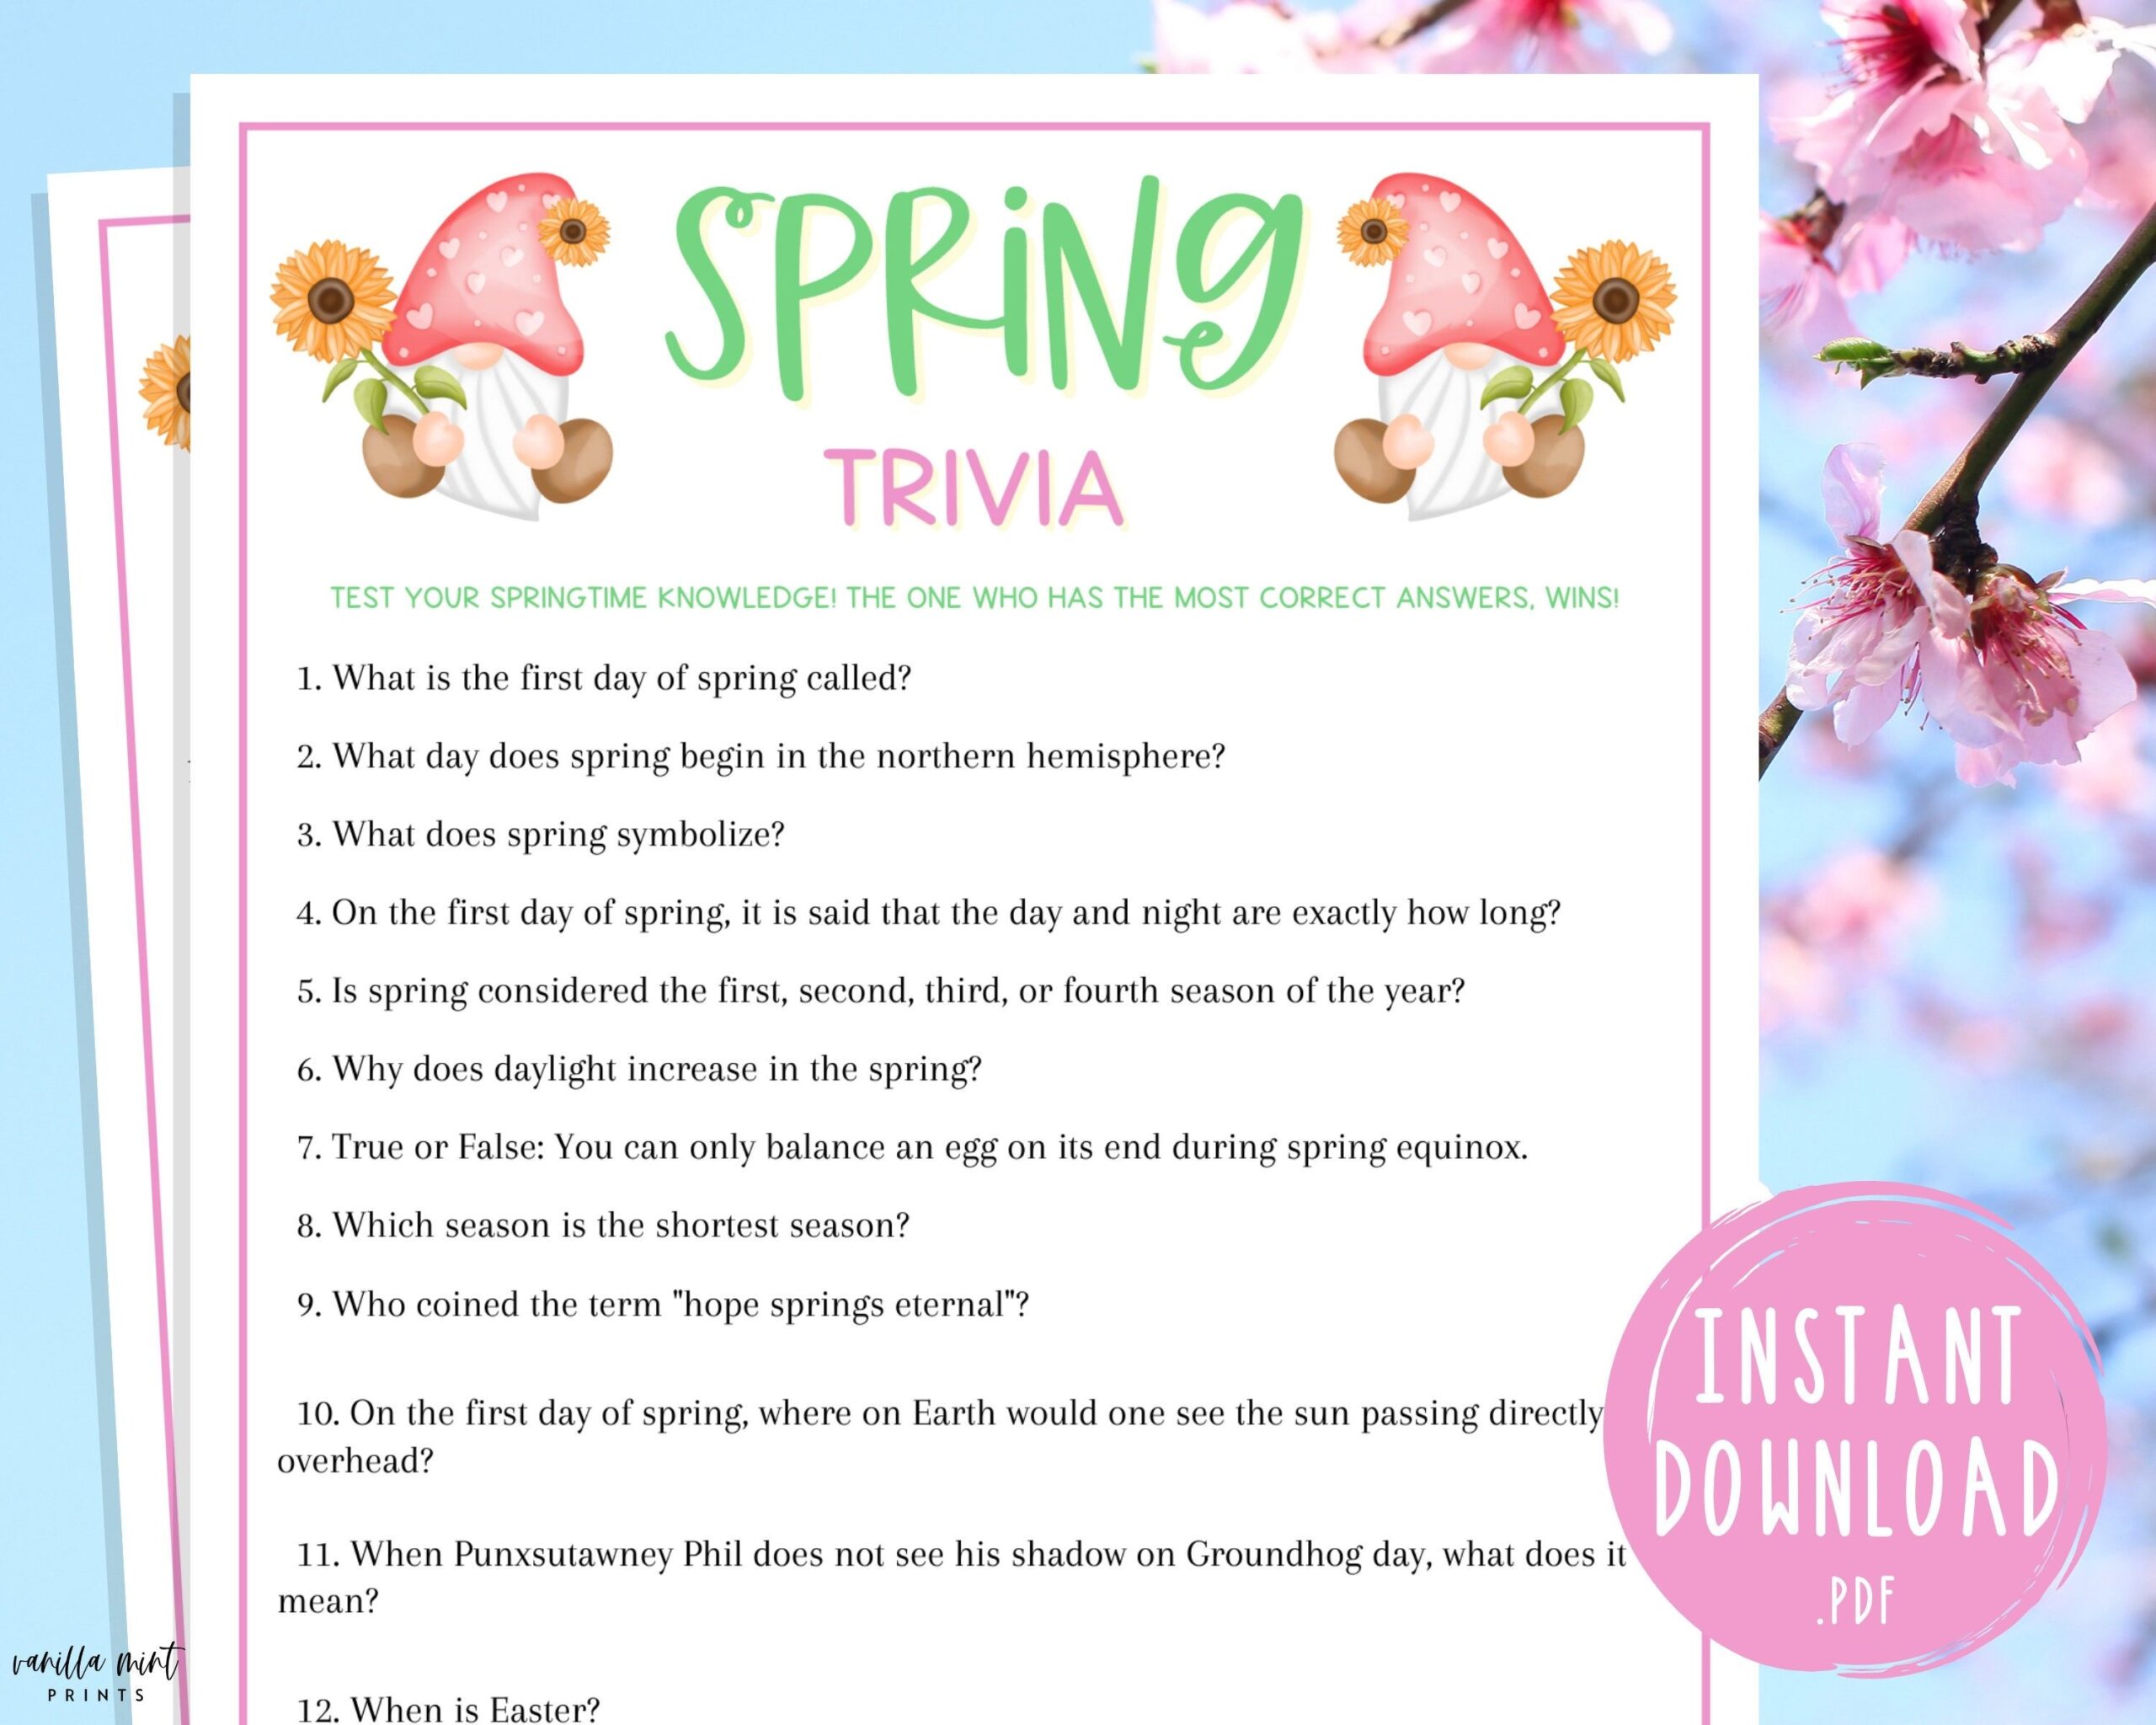 Spring Trivia Game Printable Springtime Games Party Games Spring Activities For Adults And Kids Fun Spring Games Etsy Spring Games Trivia Games Trivia